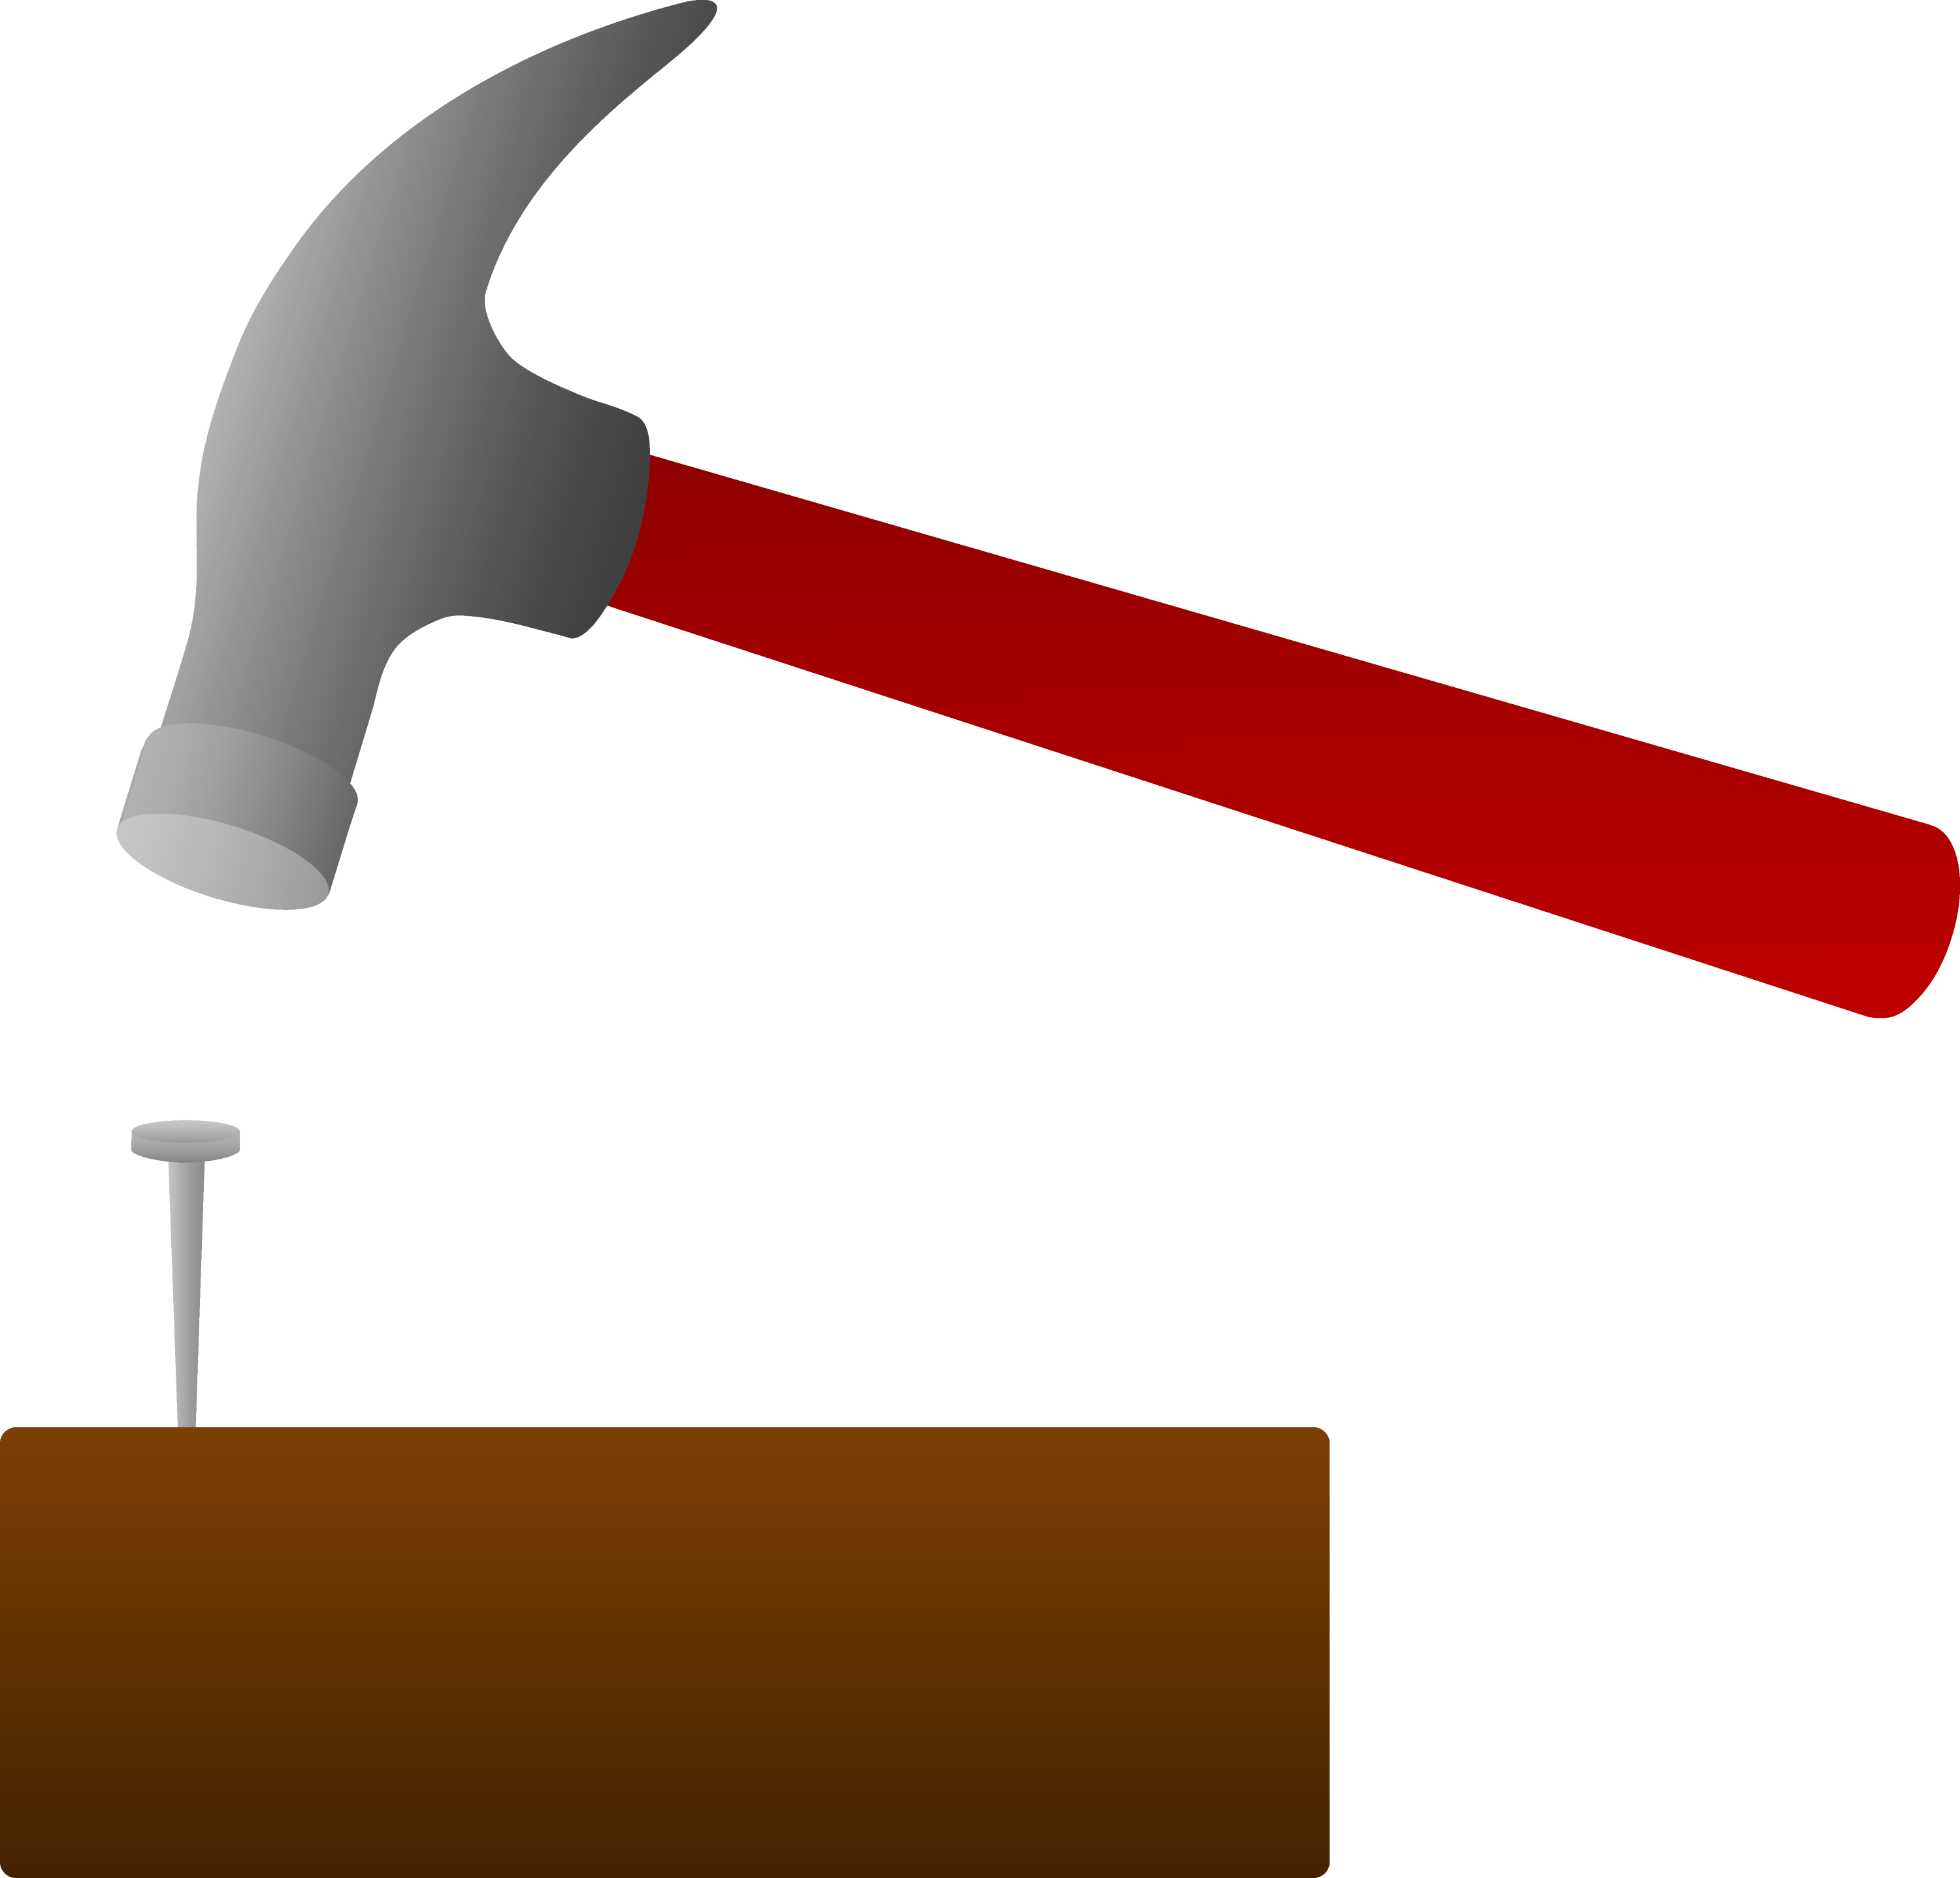 hammer and nails clipart - photo #4